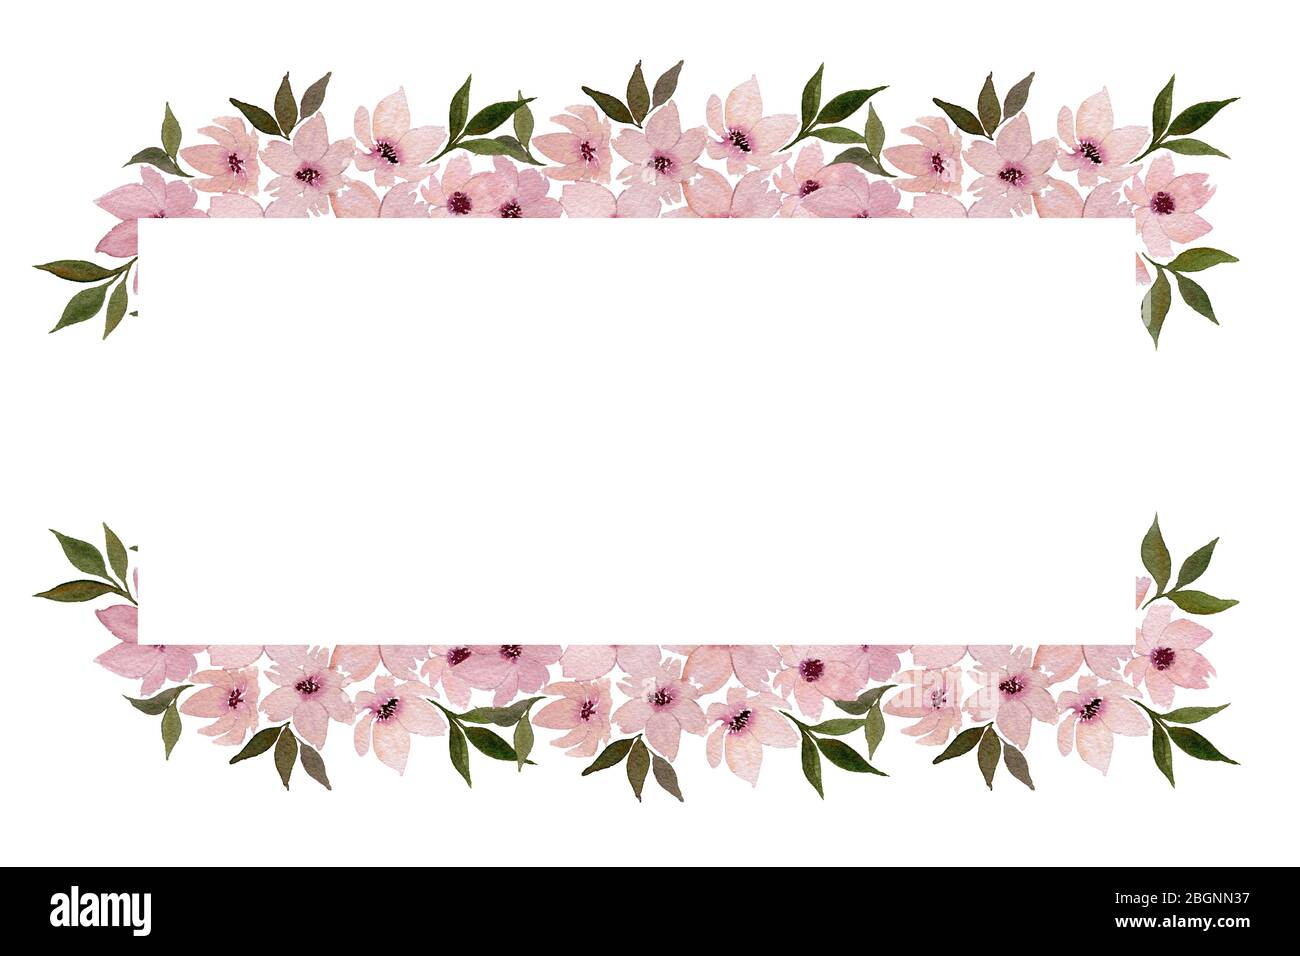 Watercolor Pink Flower Frame In Pink And Purple Hues Elegant Floral Decoration For Mothers Day Floral Frame Illustration With Copy Space Stock Photo Alamy